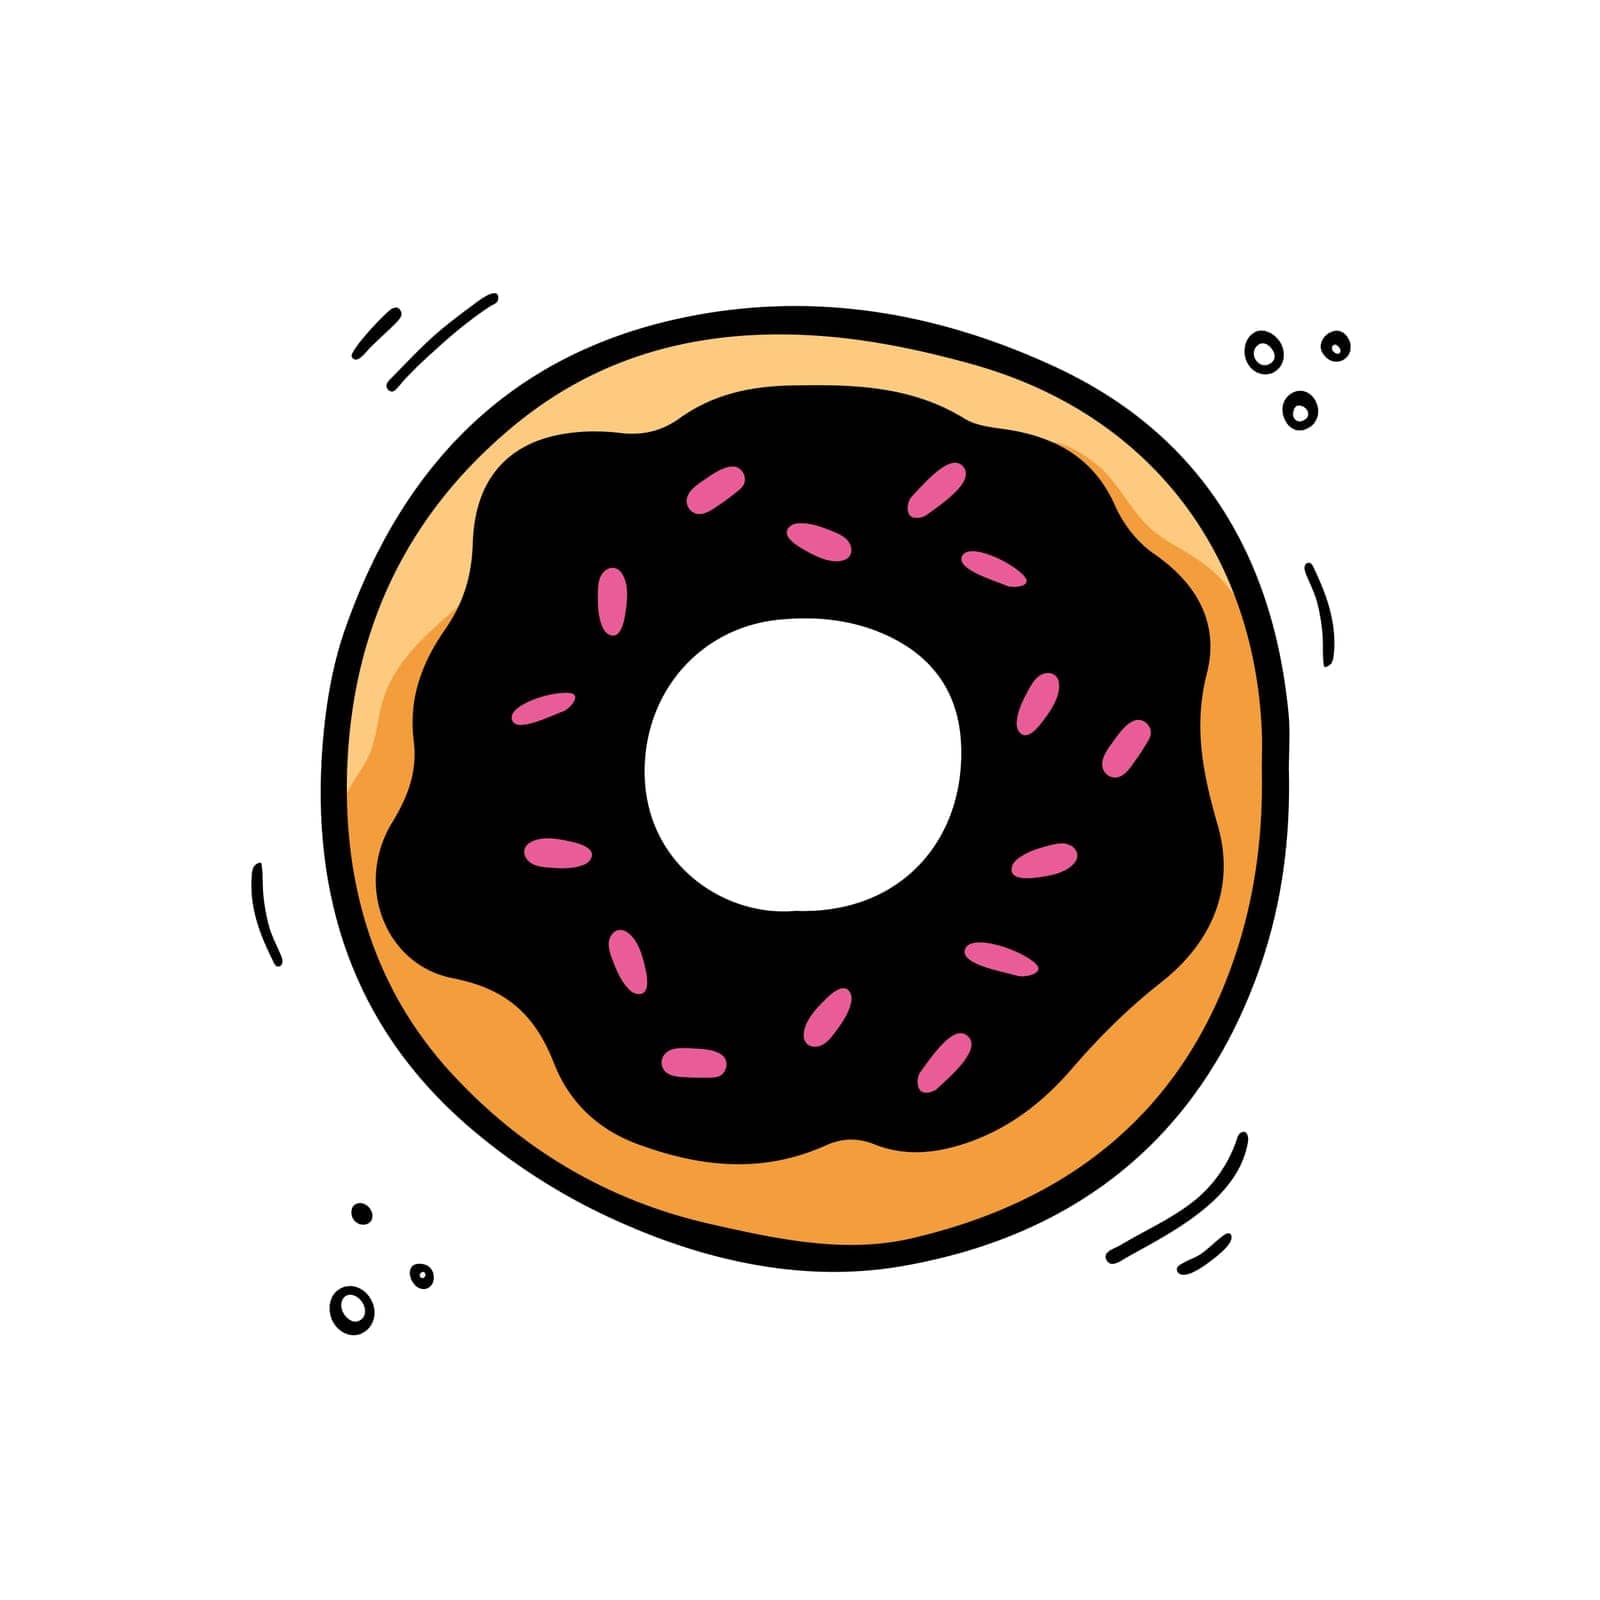 Donut illustration. Fast food illustration in doodle style. Hand drawn Sketch of doughnut. Hand drawn donut.